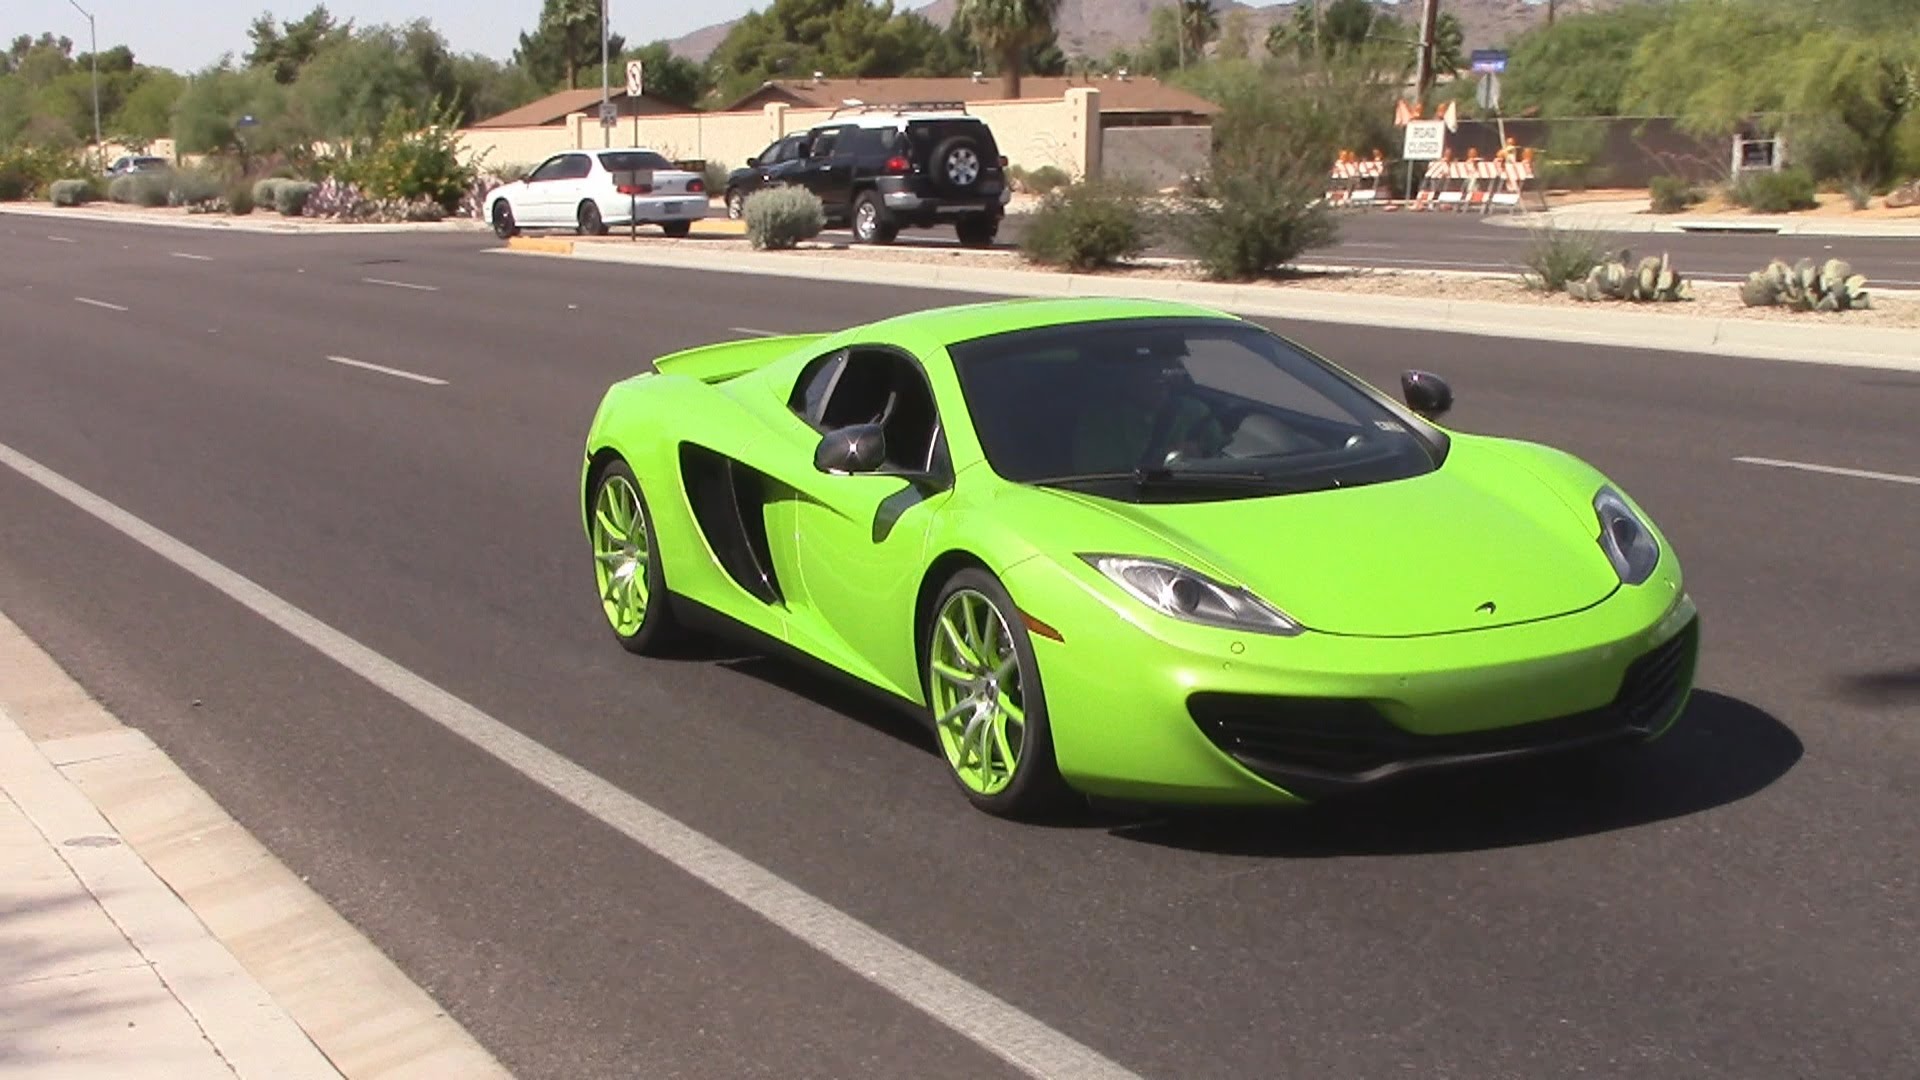 Supercars and Sports Cars Leaving Car Show - McLaren MP4-12C, Nissan ...